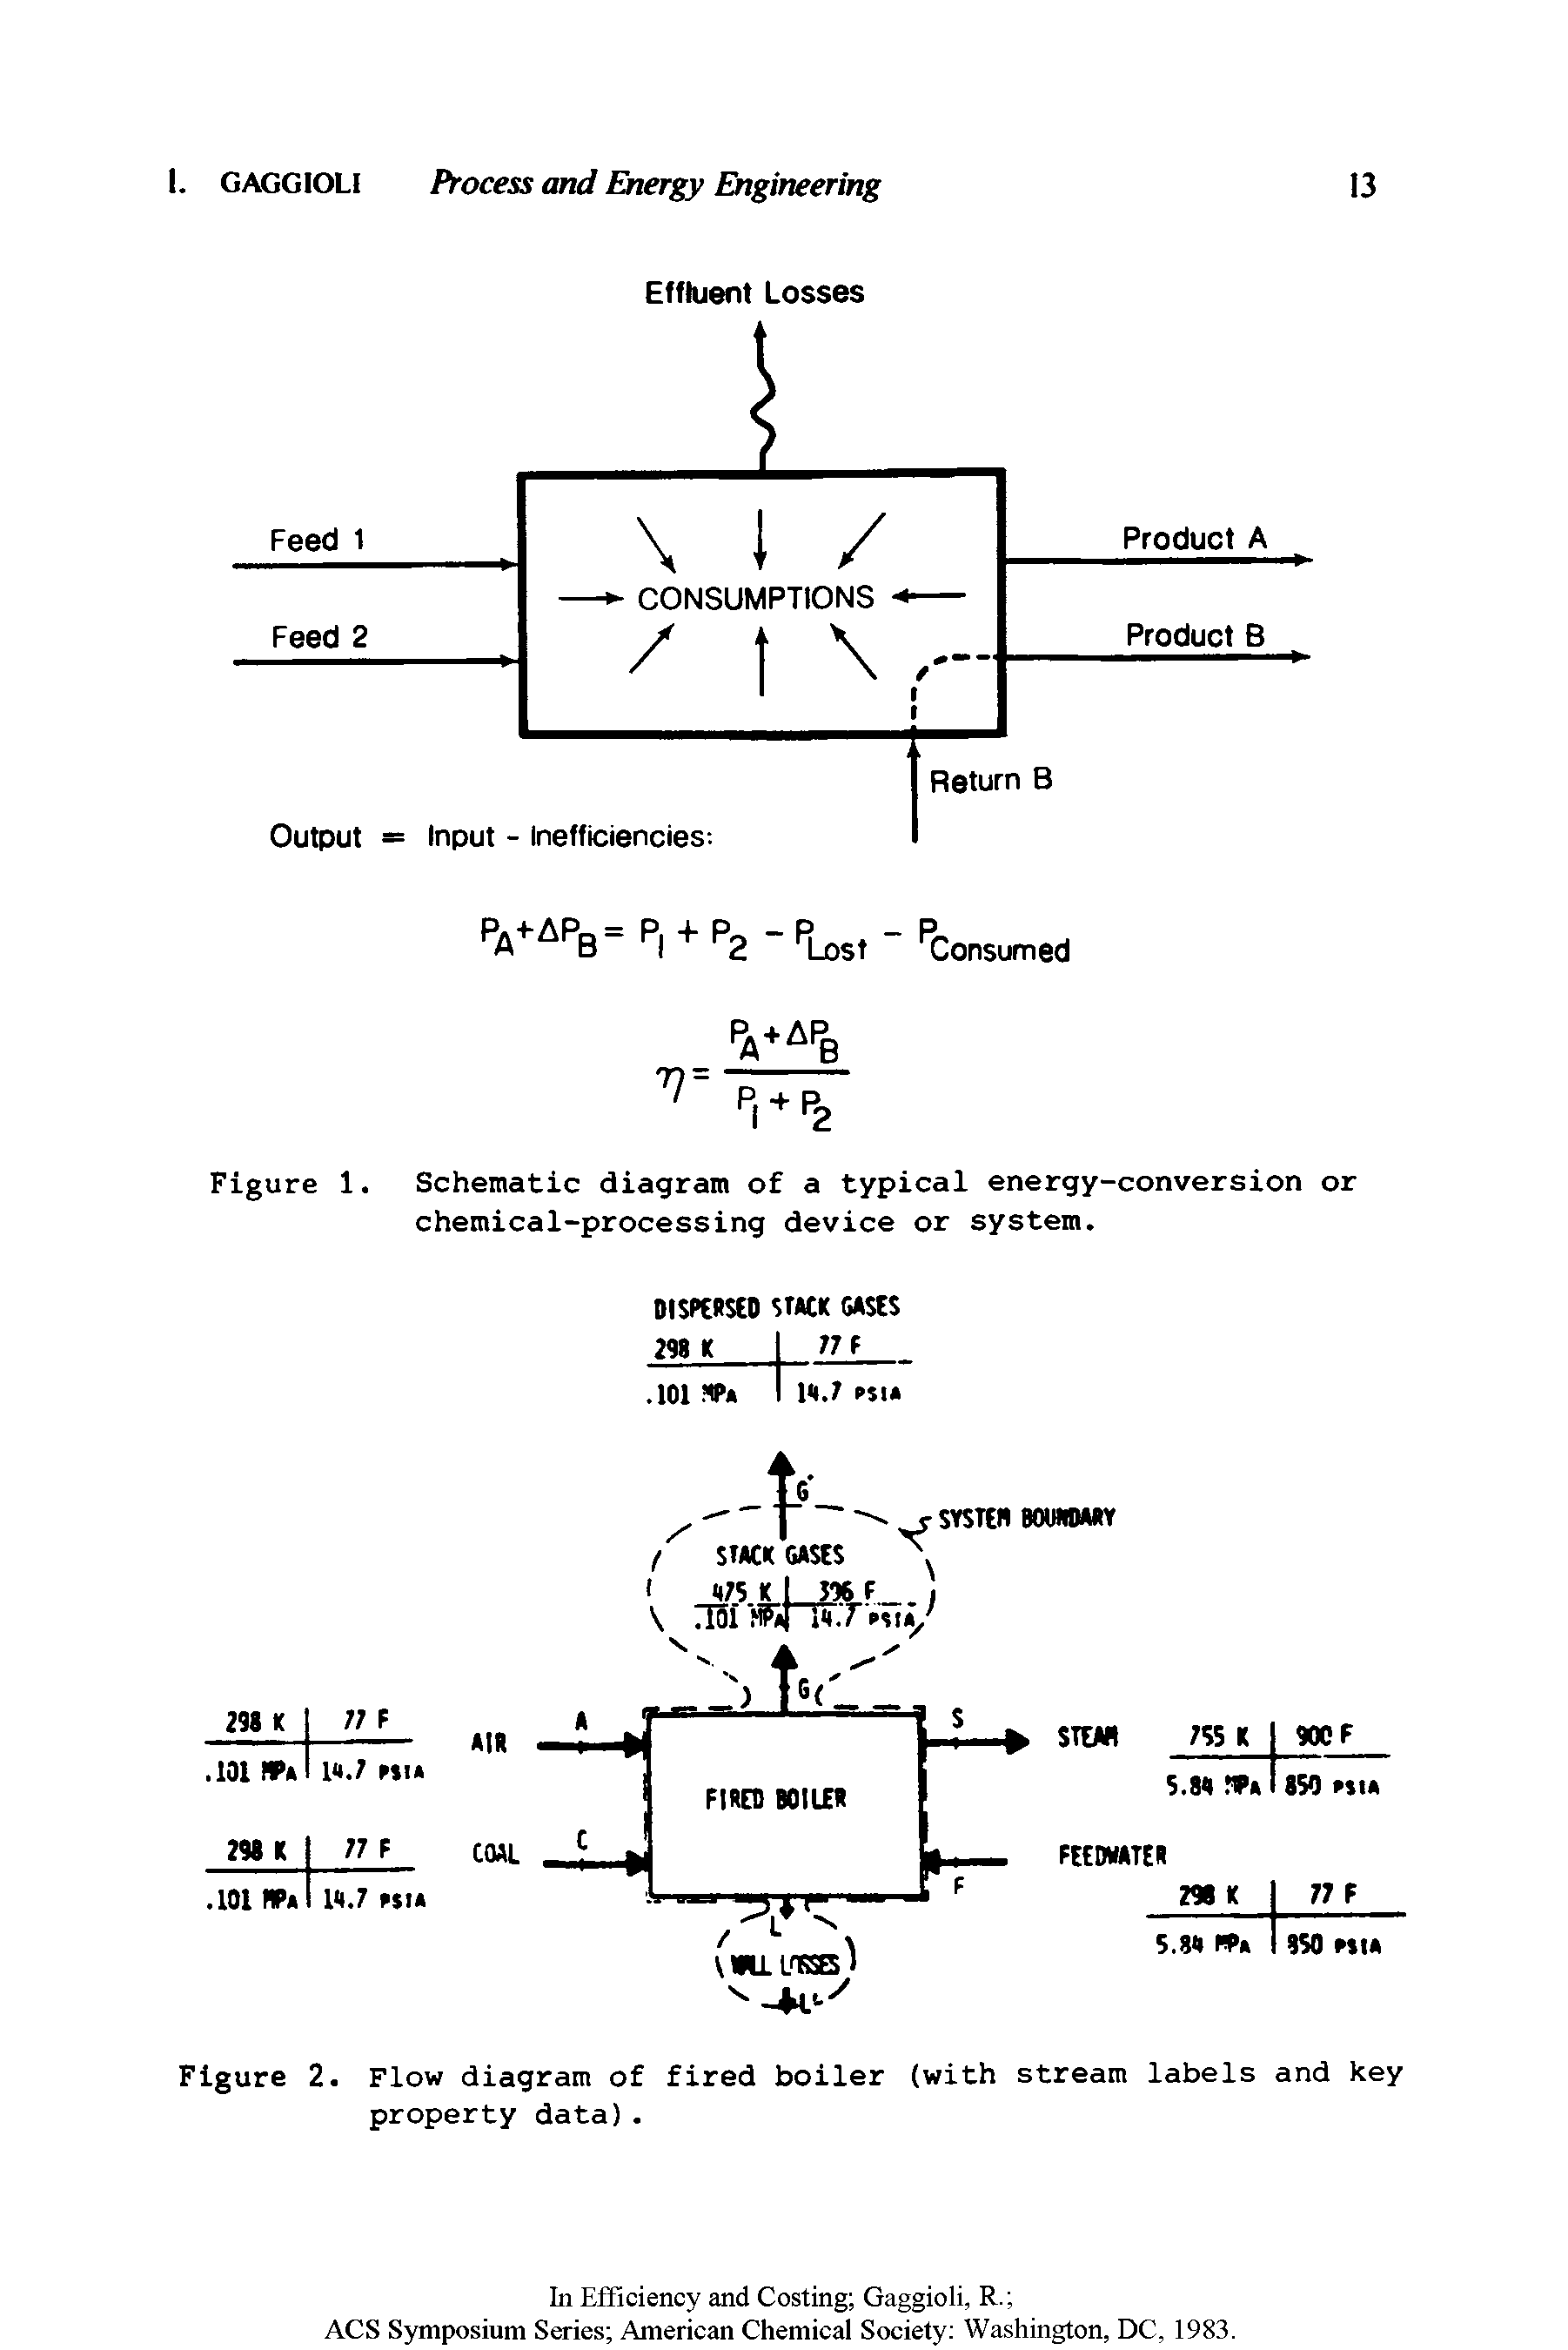 Figure 1. Schematic diagram of a typical energy-conversion or chemical-processing device or system.